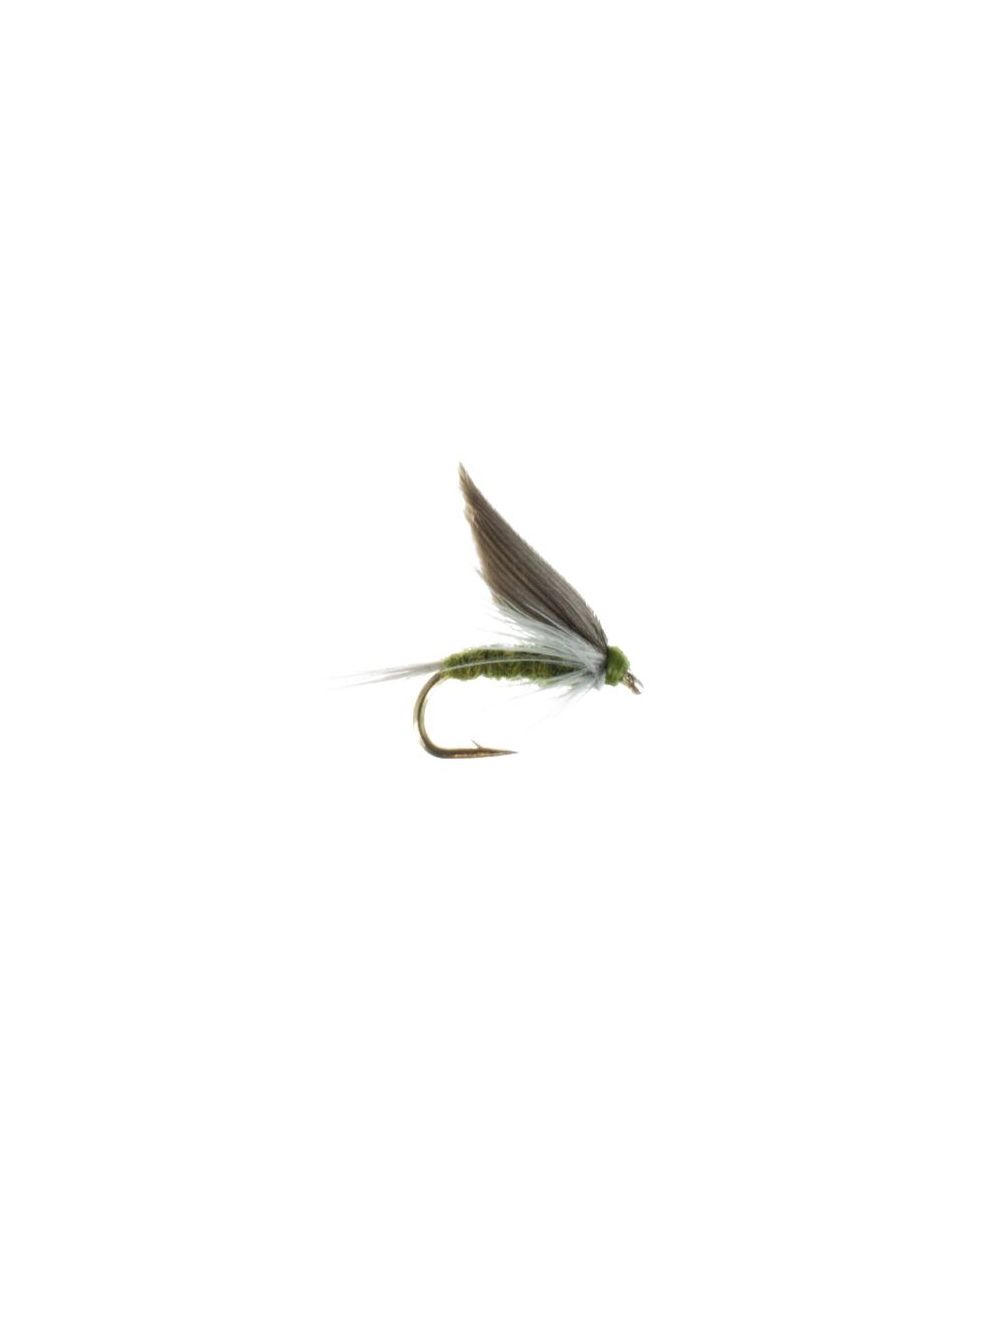 Wet Fly, Blue Wing Olive